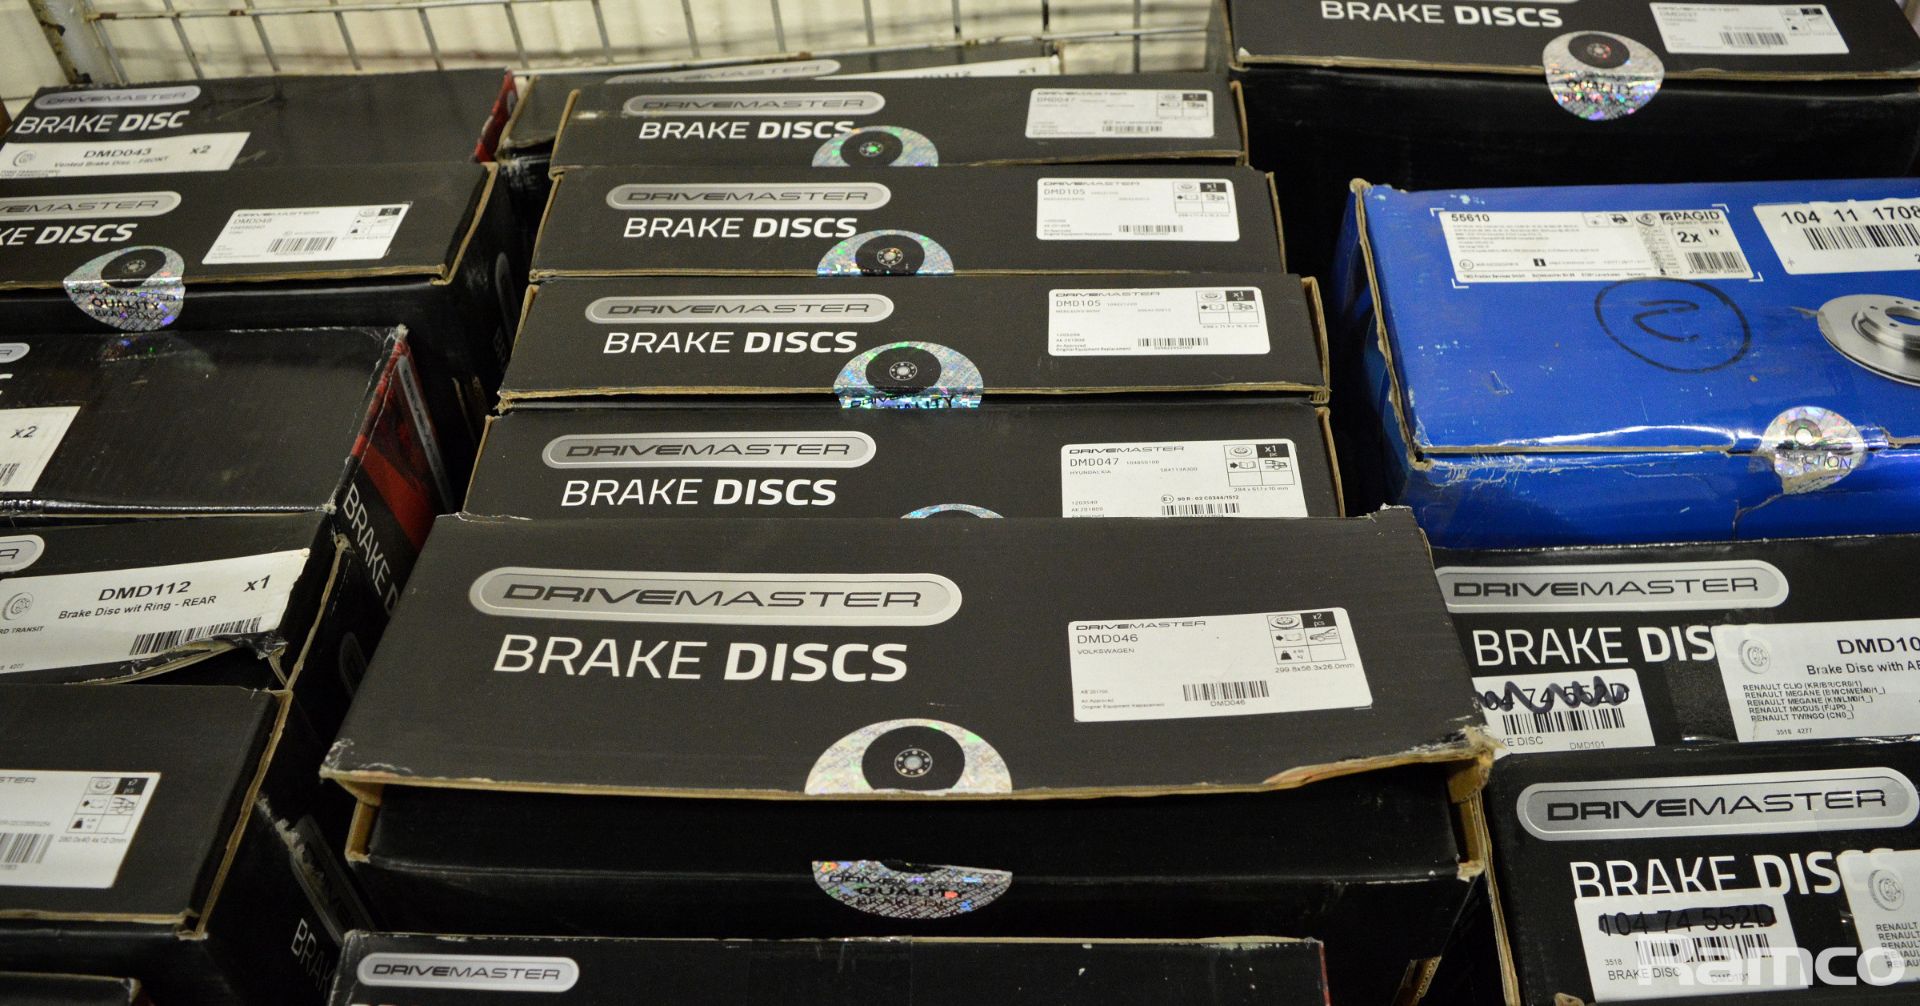 Drivemaster, Eicher, Pagid brake discs - see pictures for model / type - Image 3 of 8